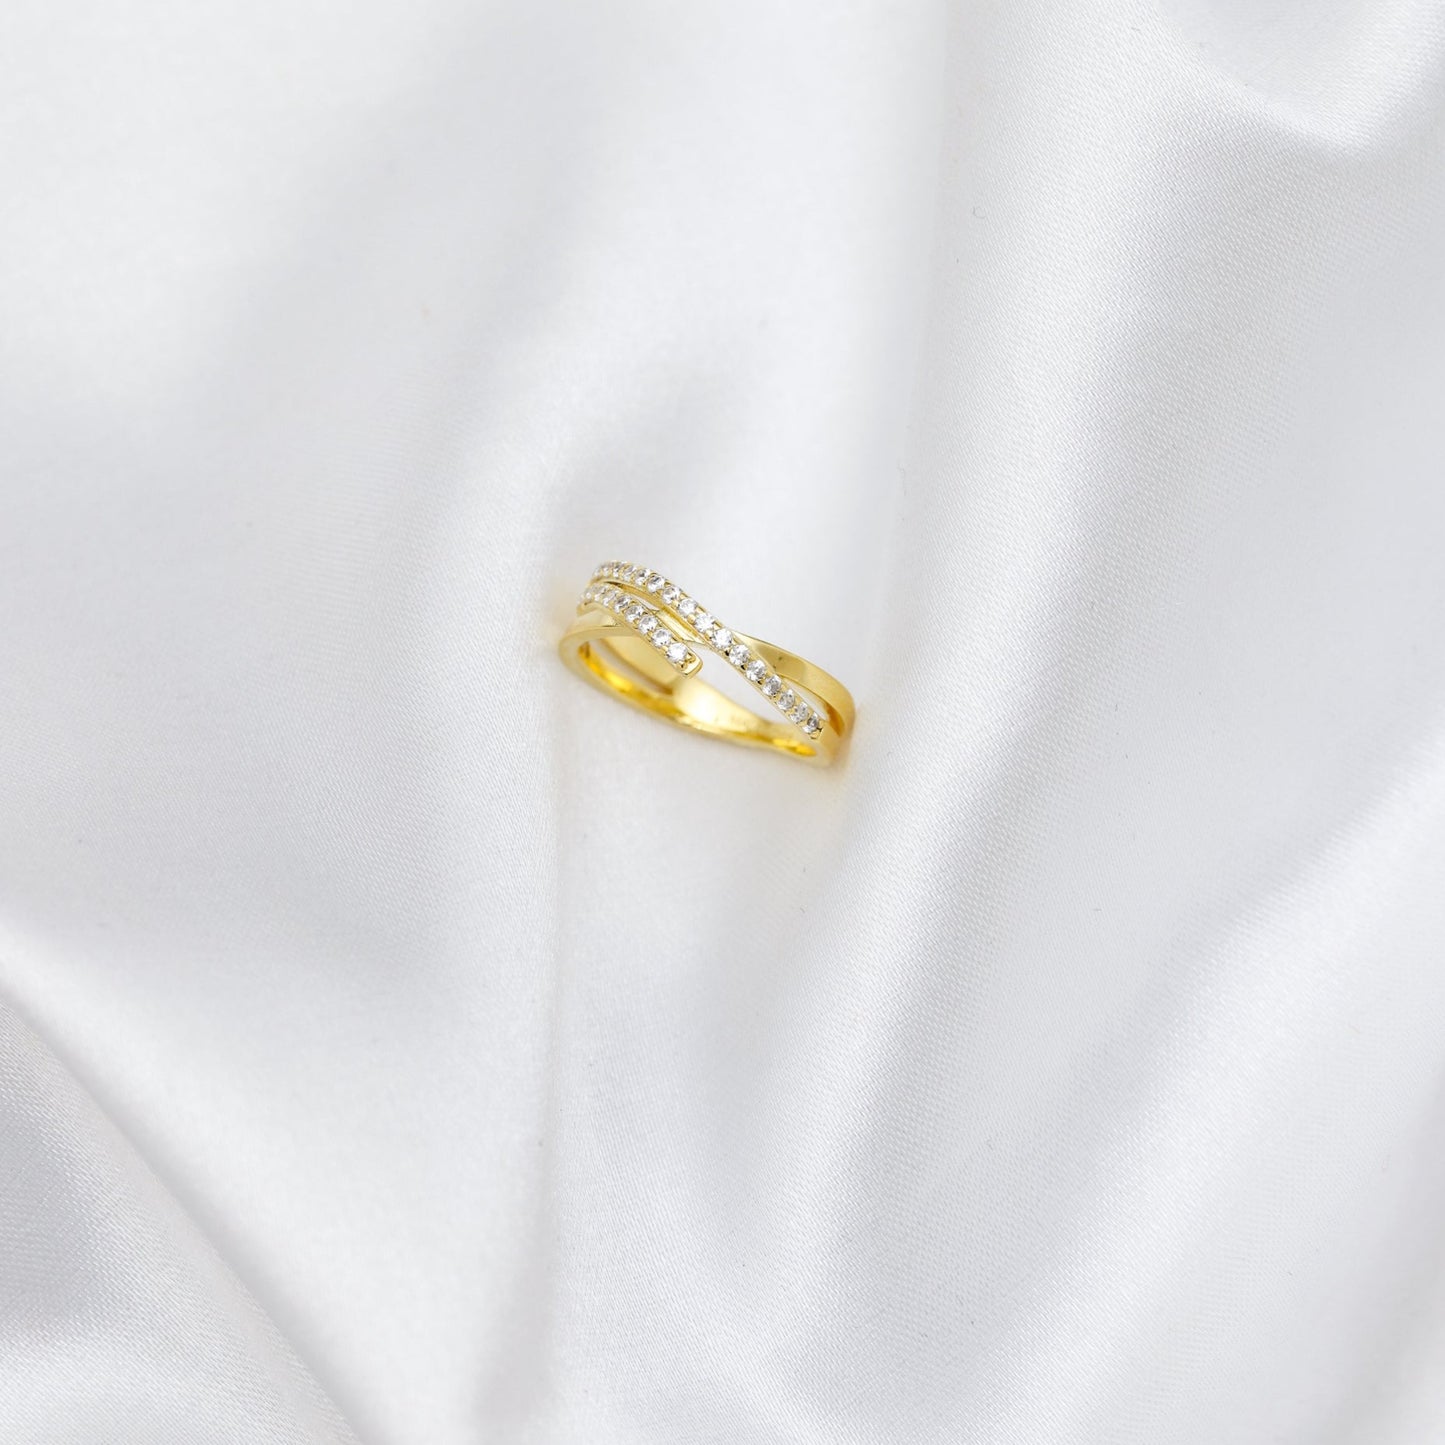 Zia pinky ring - gold plated